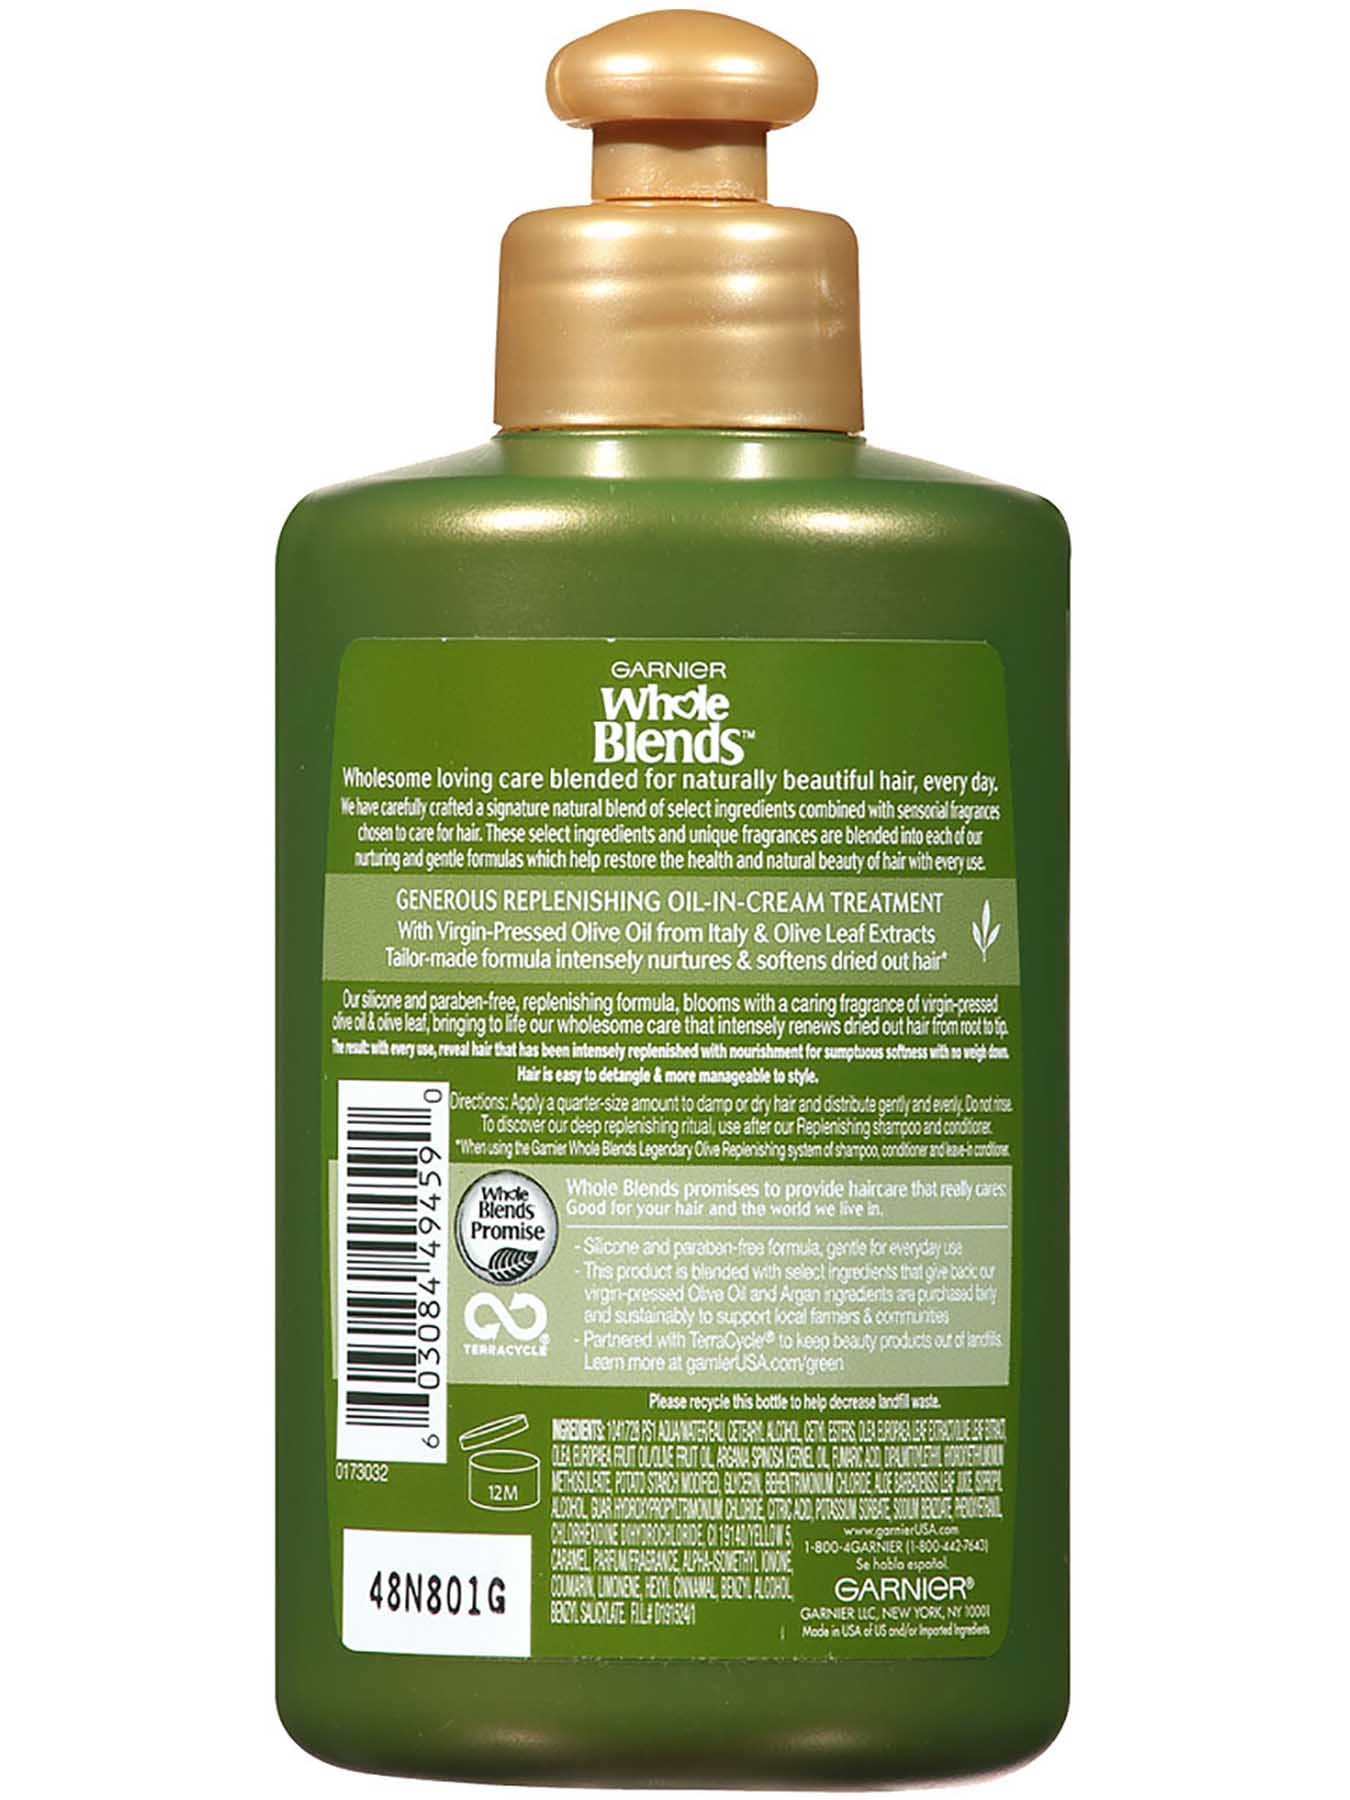 Back view of Replenishing Leave-In Conditioner with Legendary Virgin-Pressed Olive Oil and Olive Leaf Extracts.